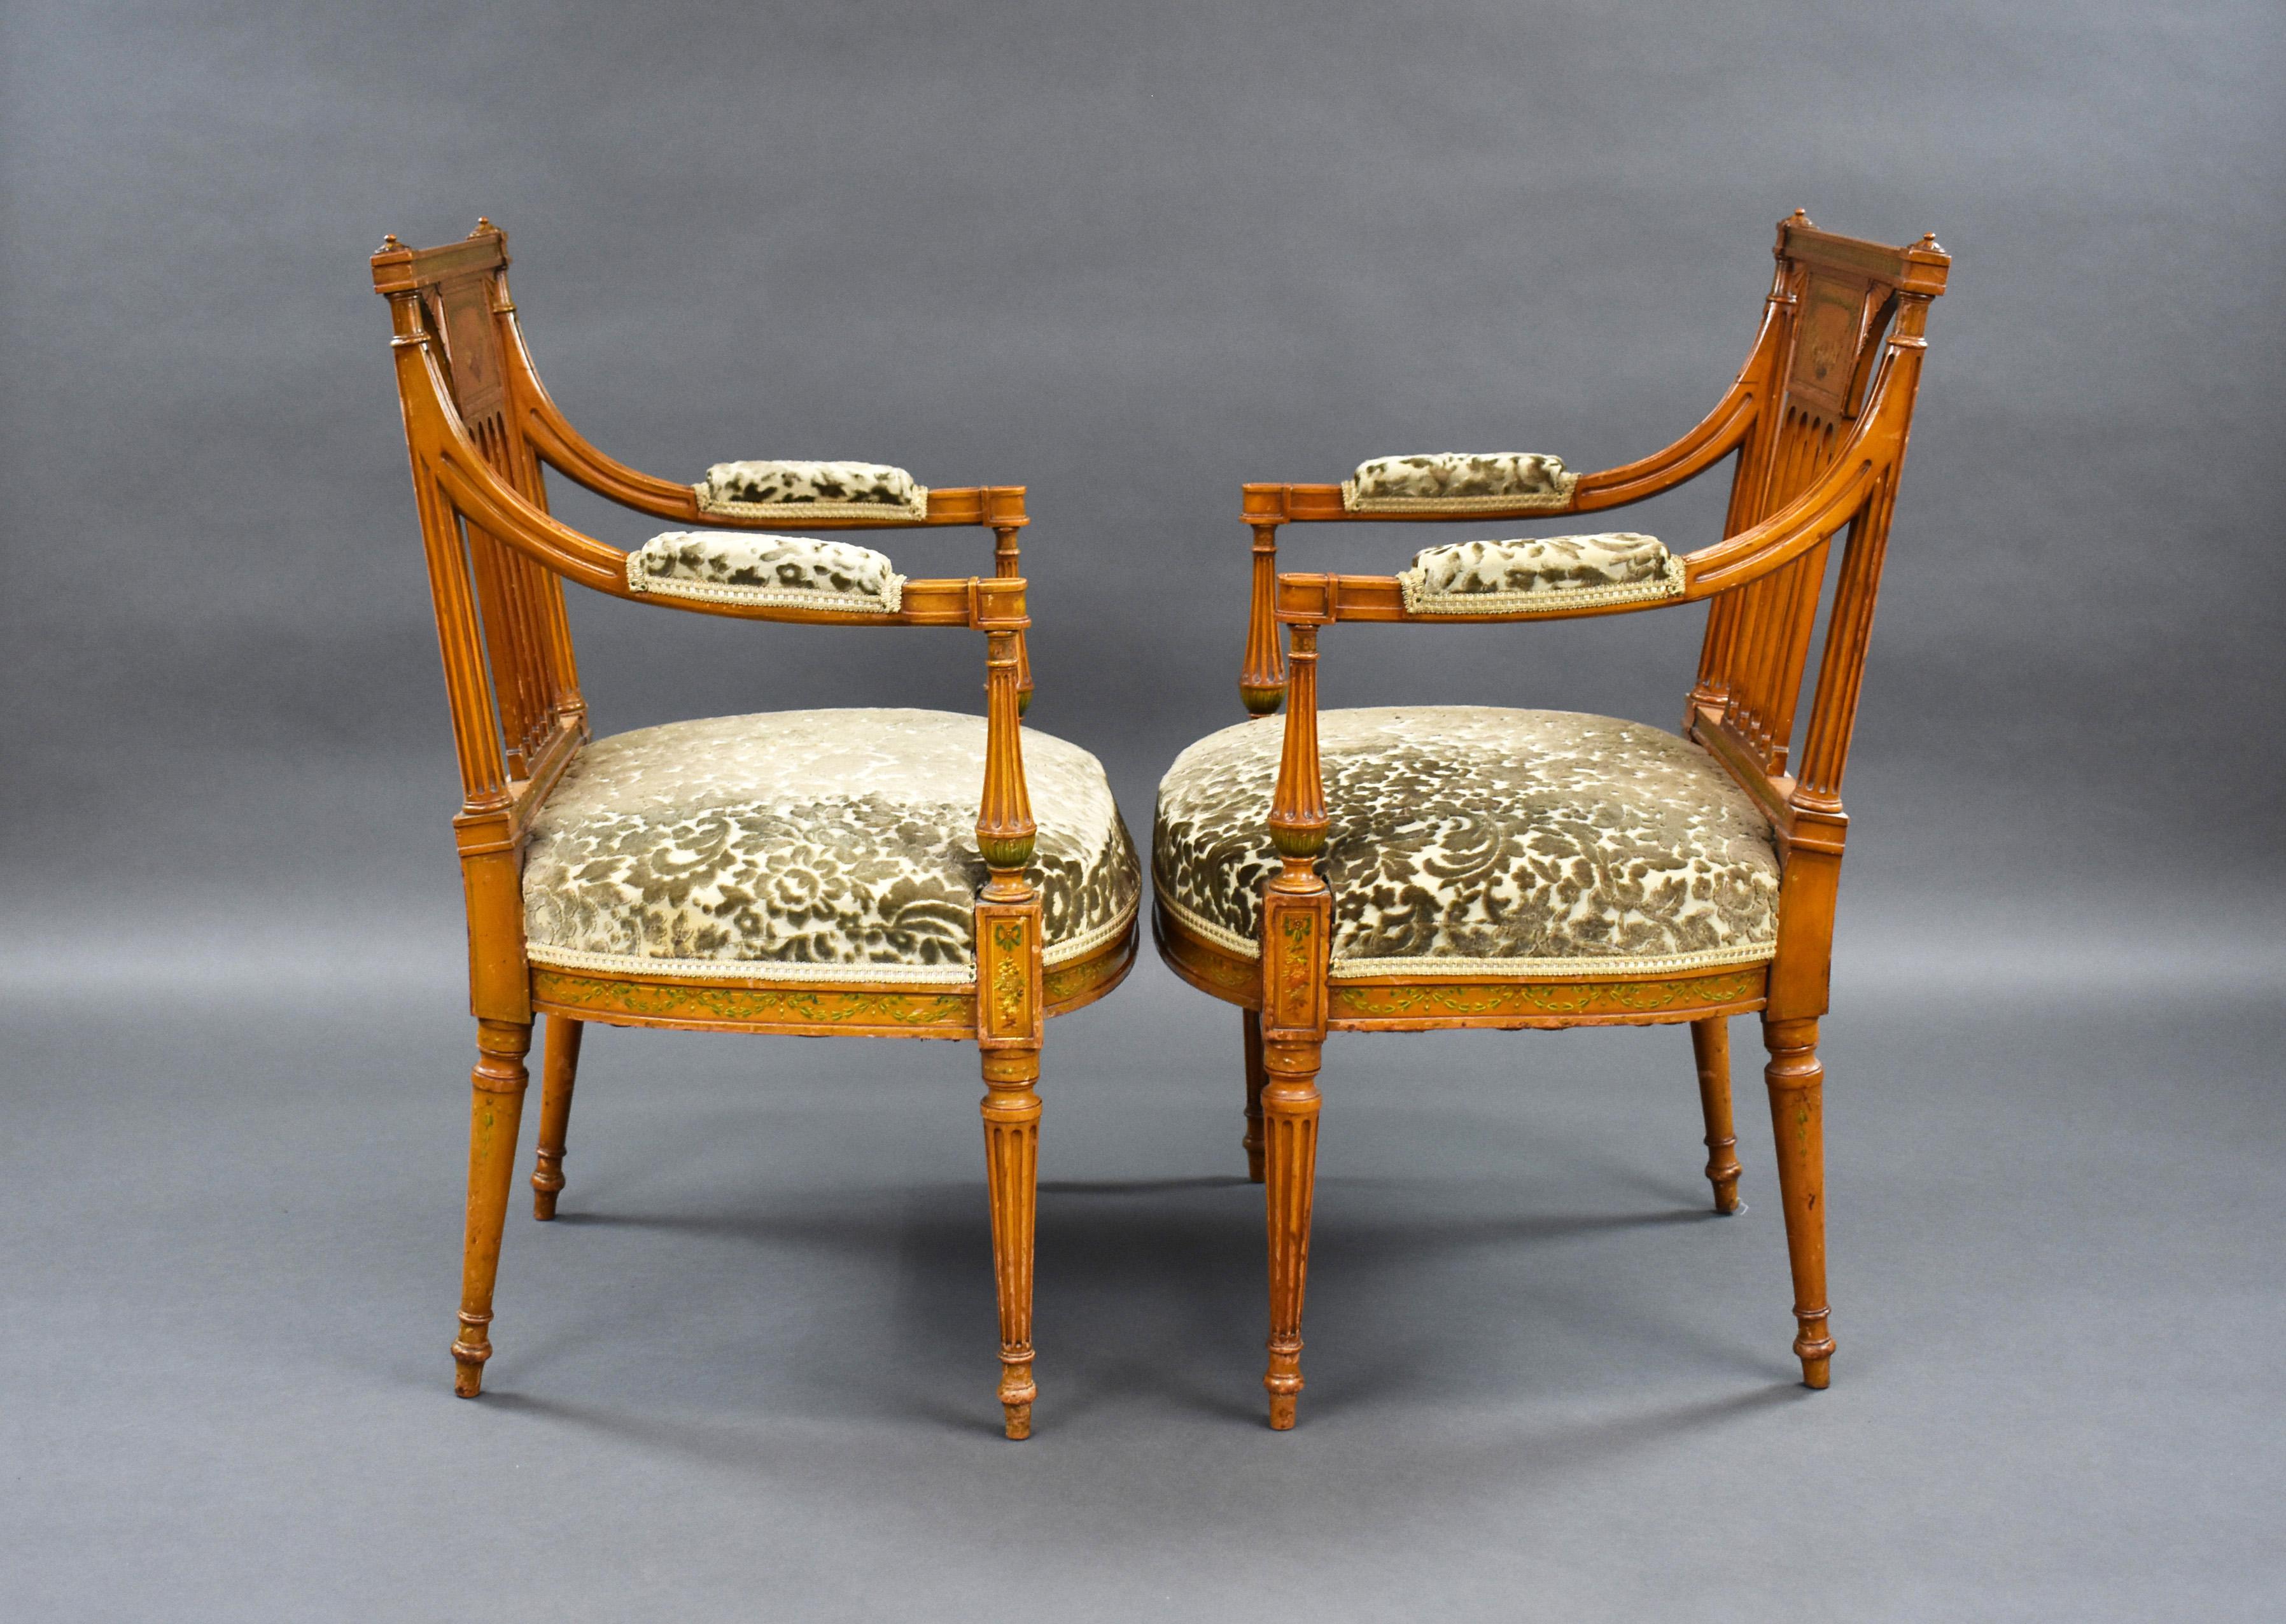 Pair of Early 20th Century English Edwardian Hand Painted Satinwood Armchairs For Sale 2